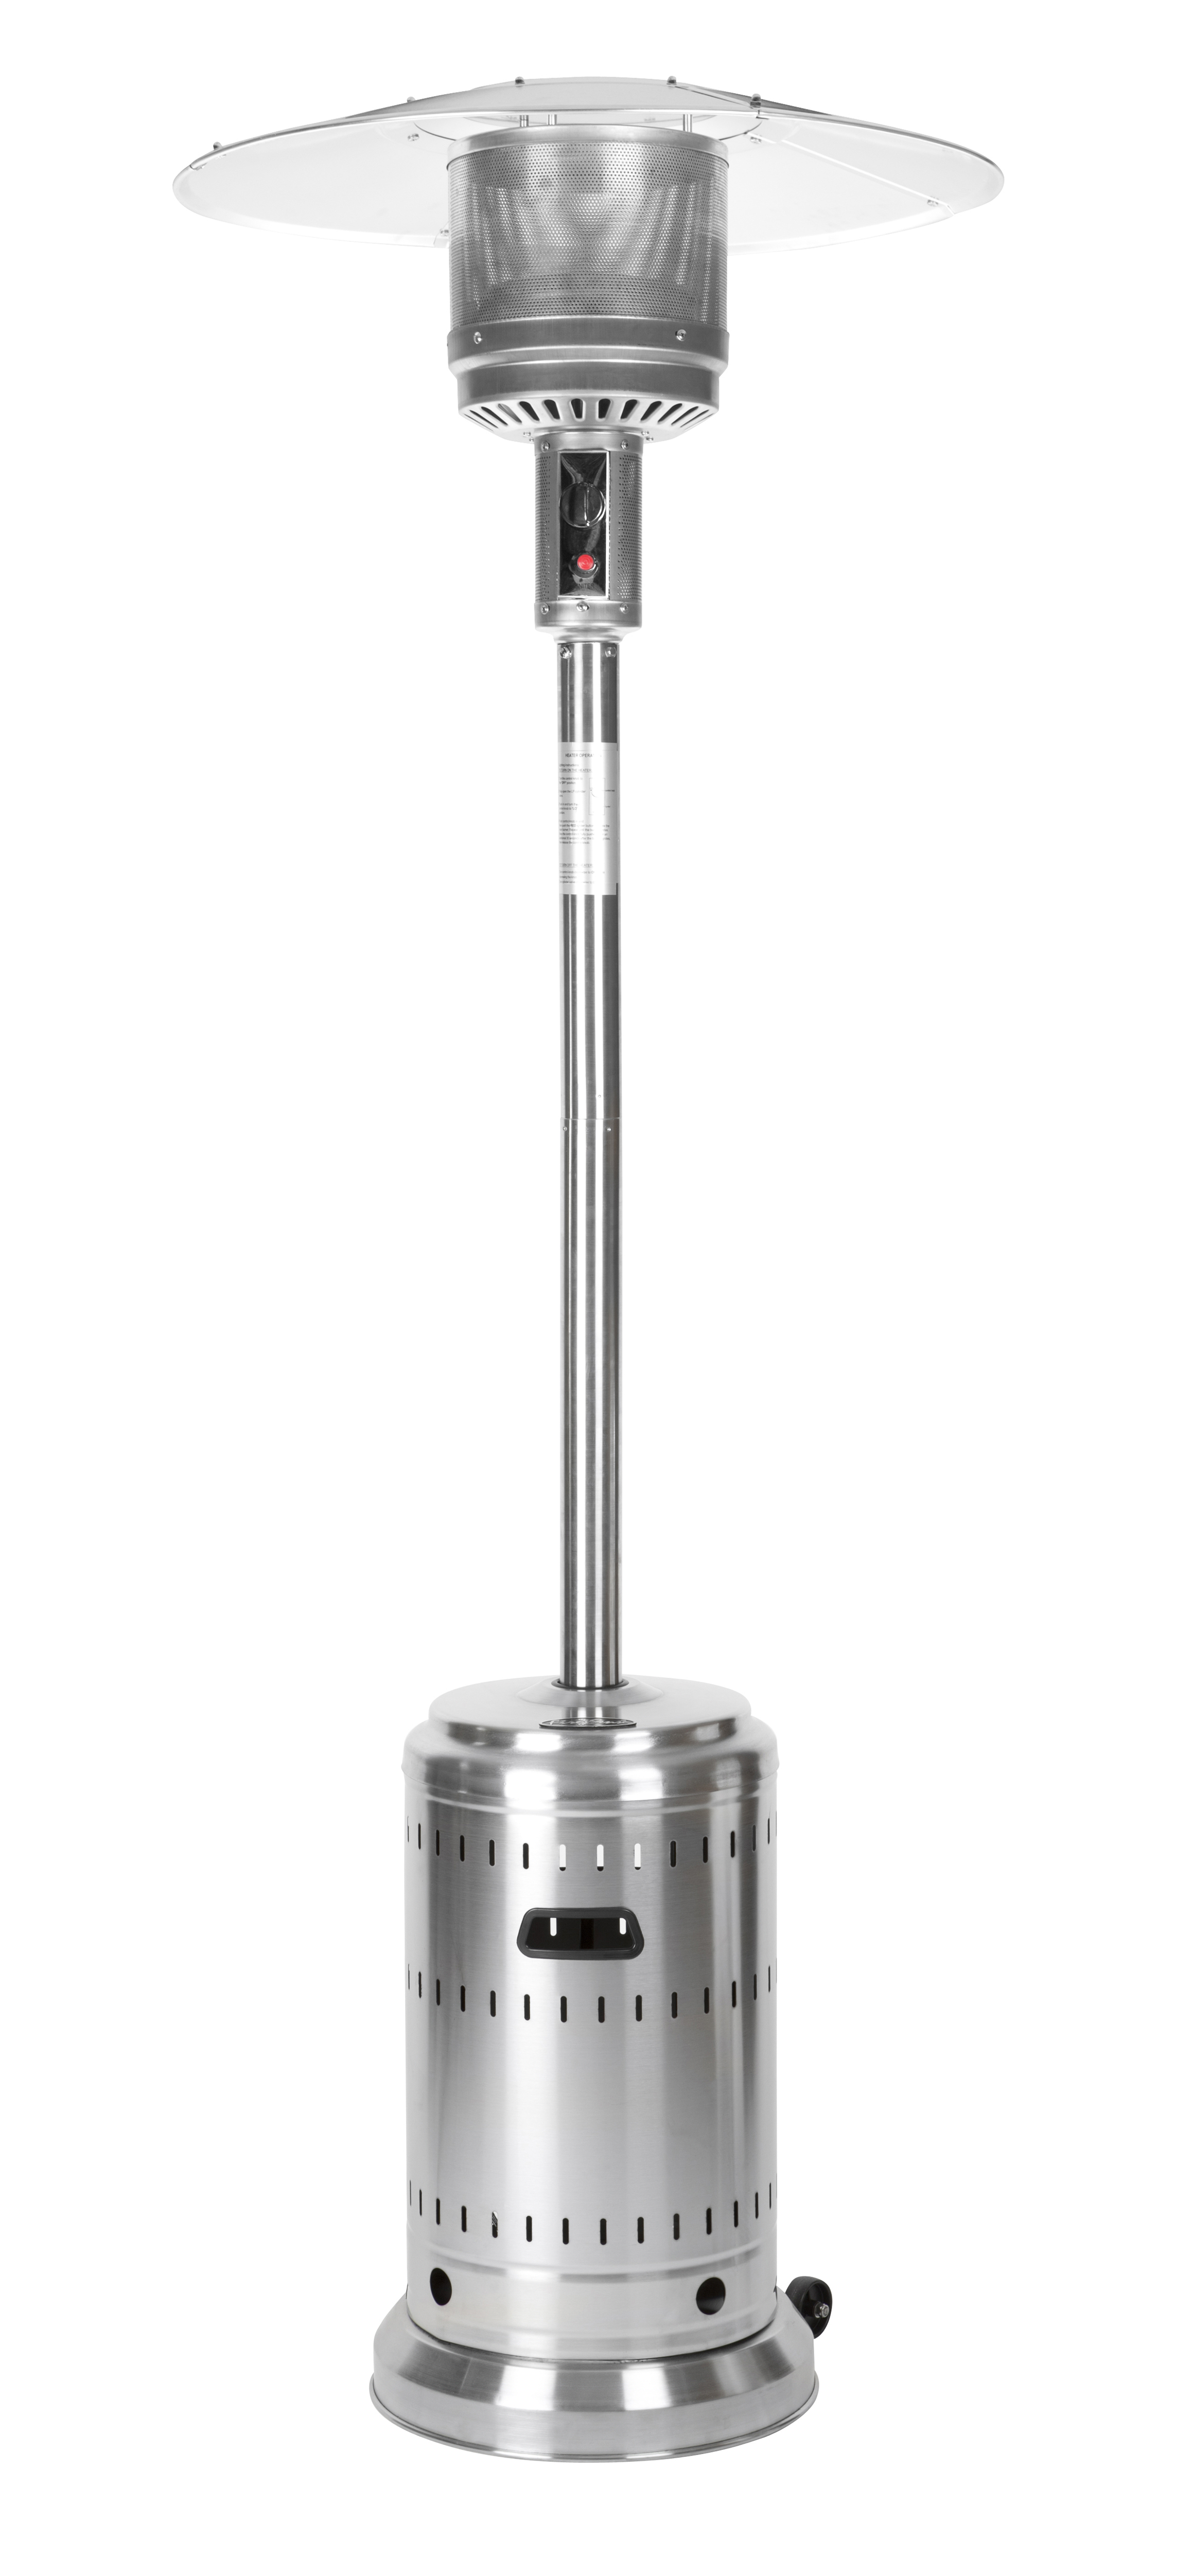 Stainless Steel Commercial Patio Heater - Costco.com Exclusive | Well